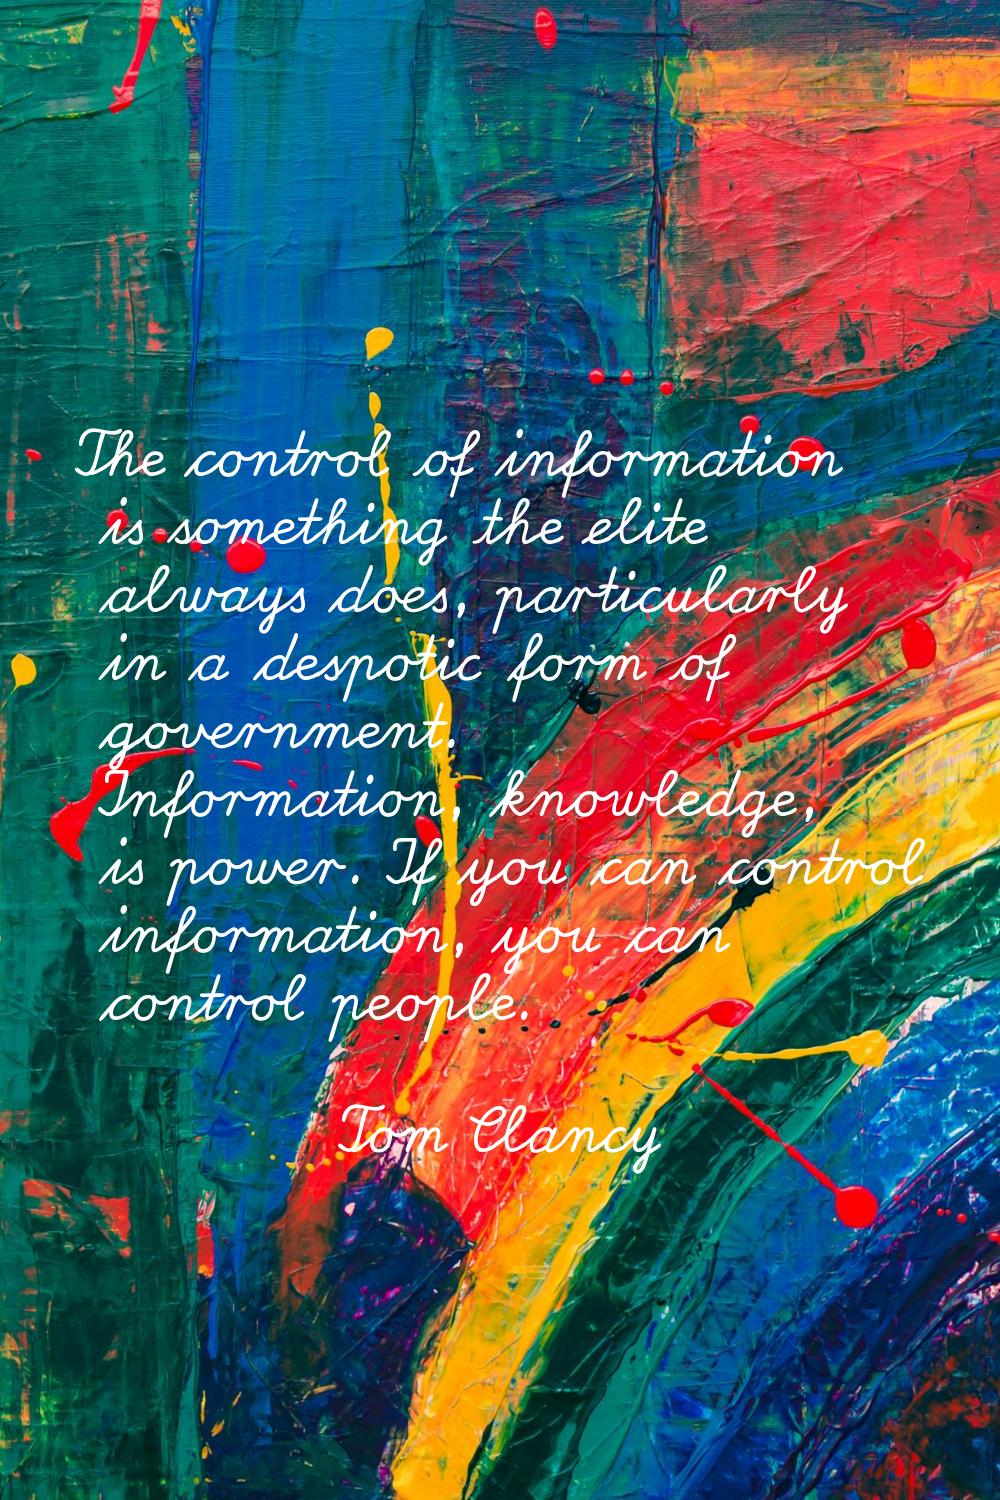 The control of information is something the elite always does, particularly in a despotic form of g